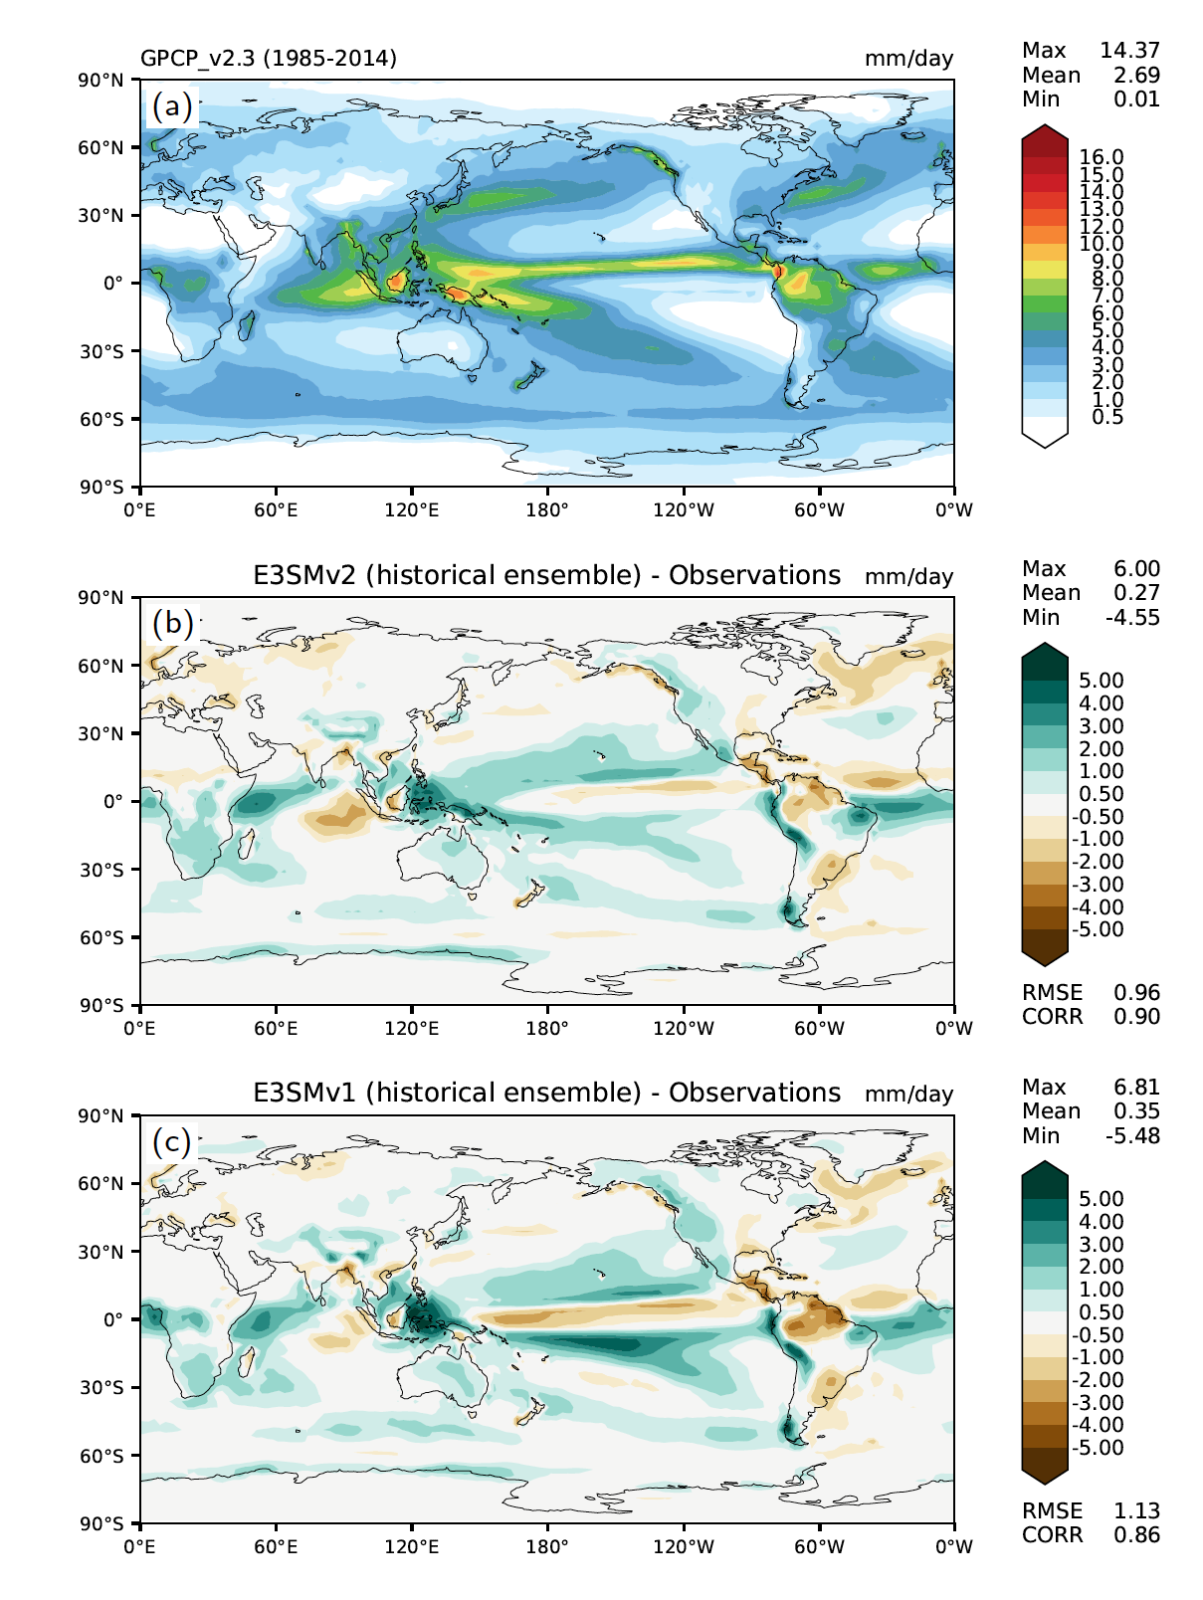 Figure 1: Annual precipitation rate (mm/day): (a) Global Precipitation Climatology Project v2.3 observational estimate (1985-2014), (b) model bias from the 5-member ensemble of E3SMv2 historical coupled simulations (1985-2014), and (c) model bias from the 5-member ensemble of E3SMv1 historical coupled simulations (1985-2014). 